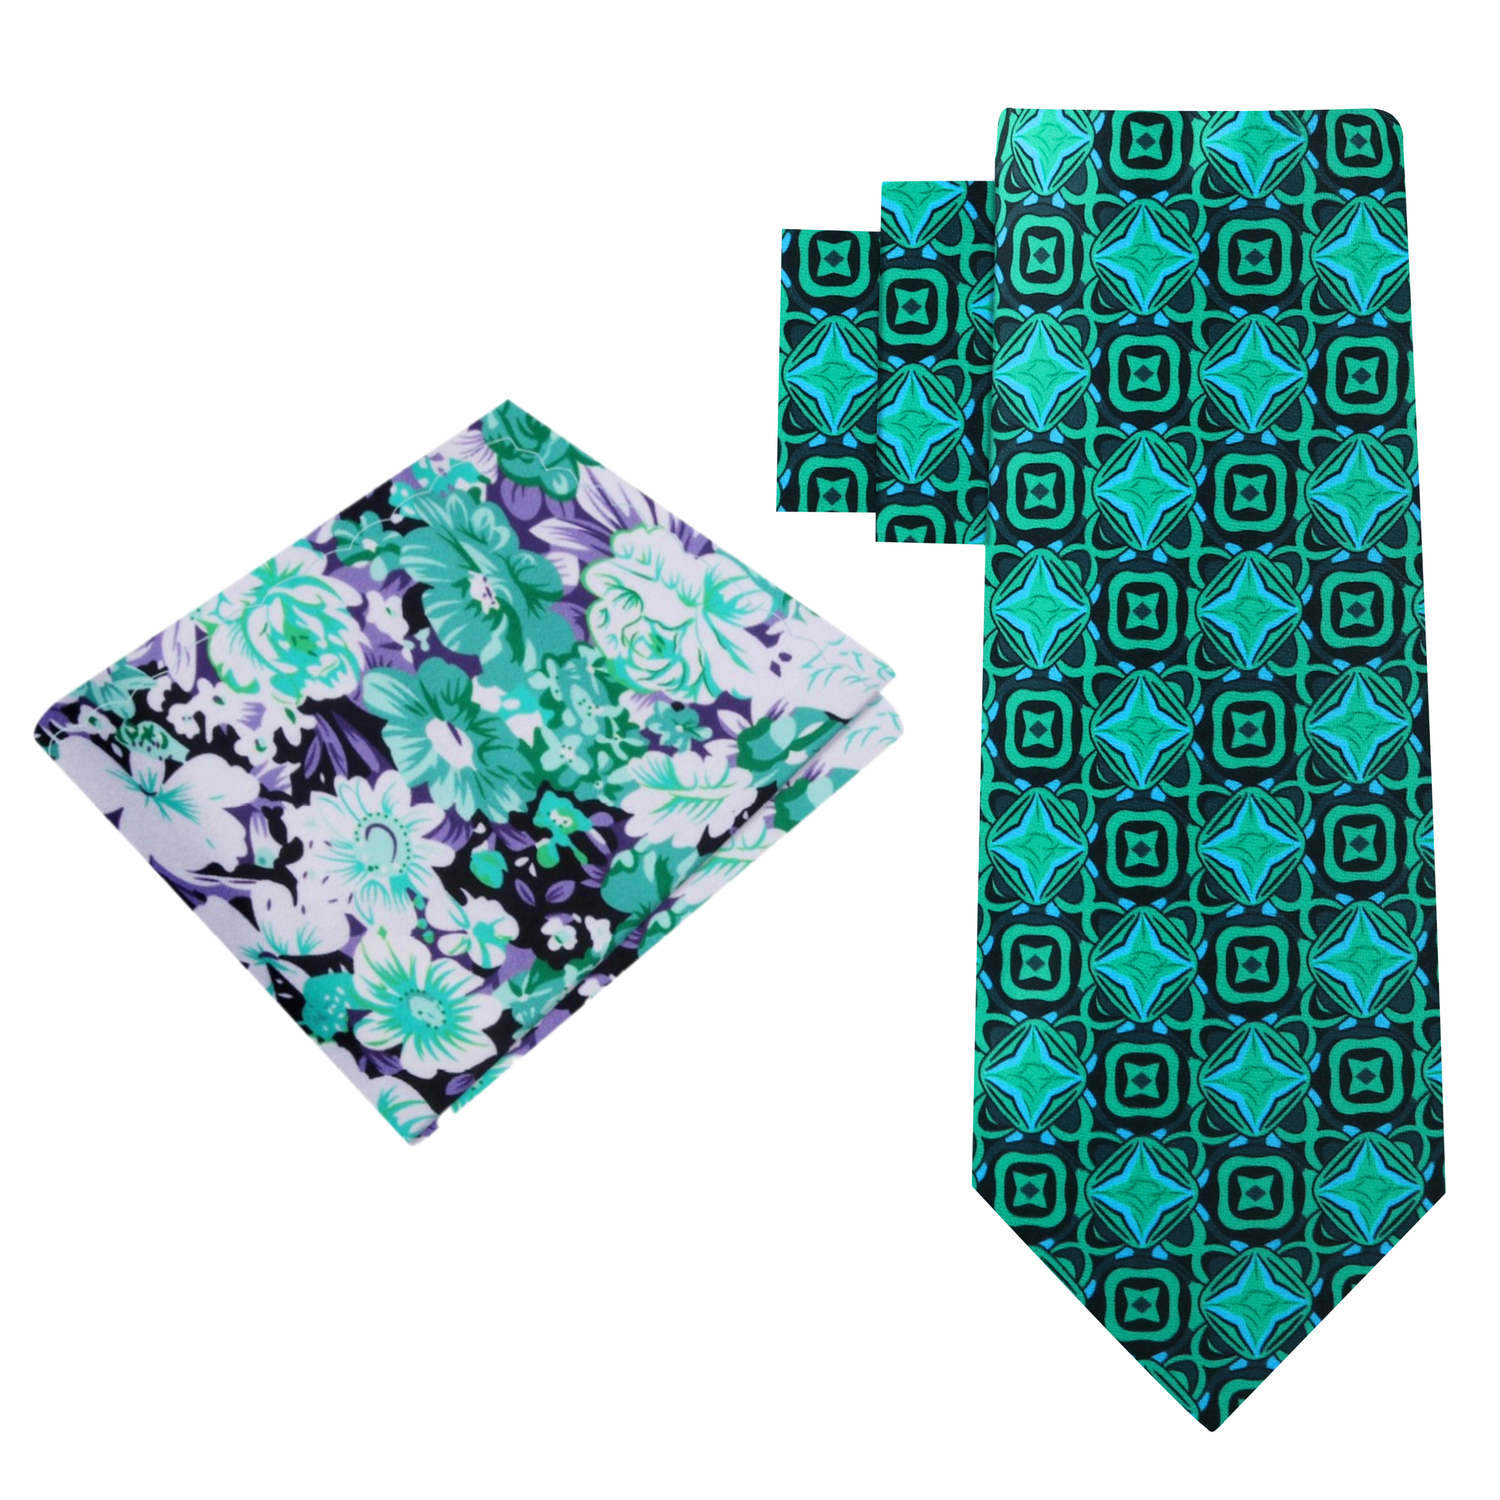 Alt View: Green Geometric Tie and Green, White, Purple Floral Square